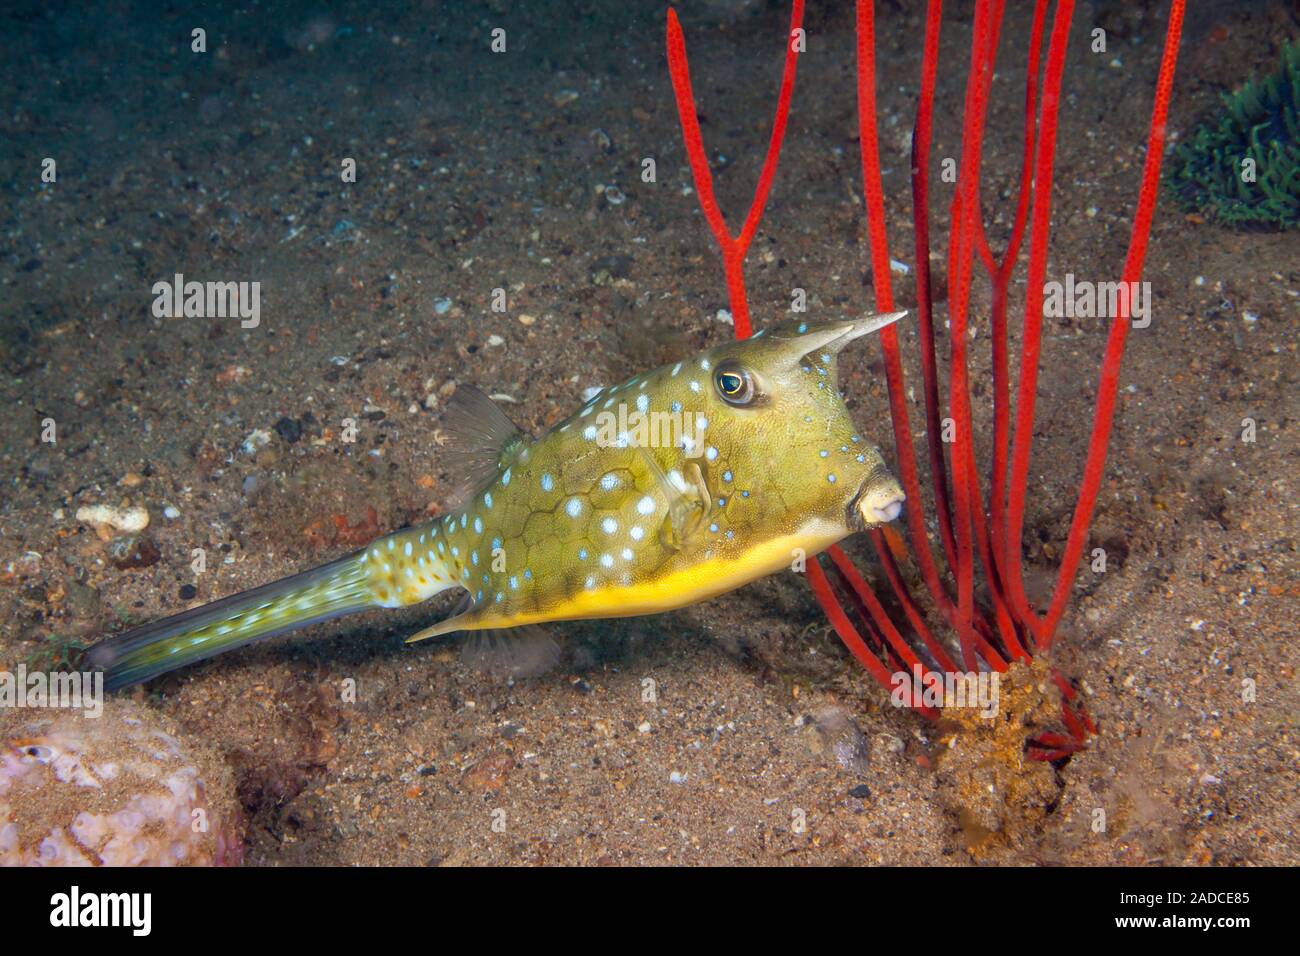 The longhorn cowfish, Lactoria cornuta, is also known as the horned boxfish. It is a species of boxfish from the family Ostraciidae, recognizable by t Stock Photo